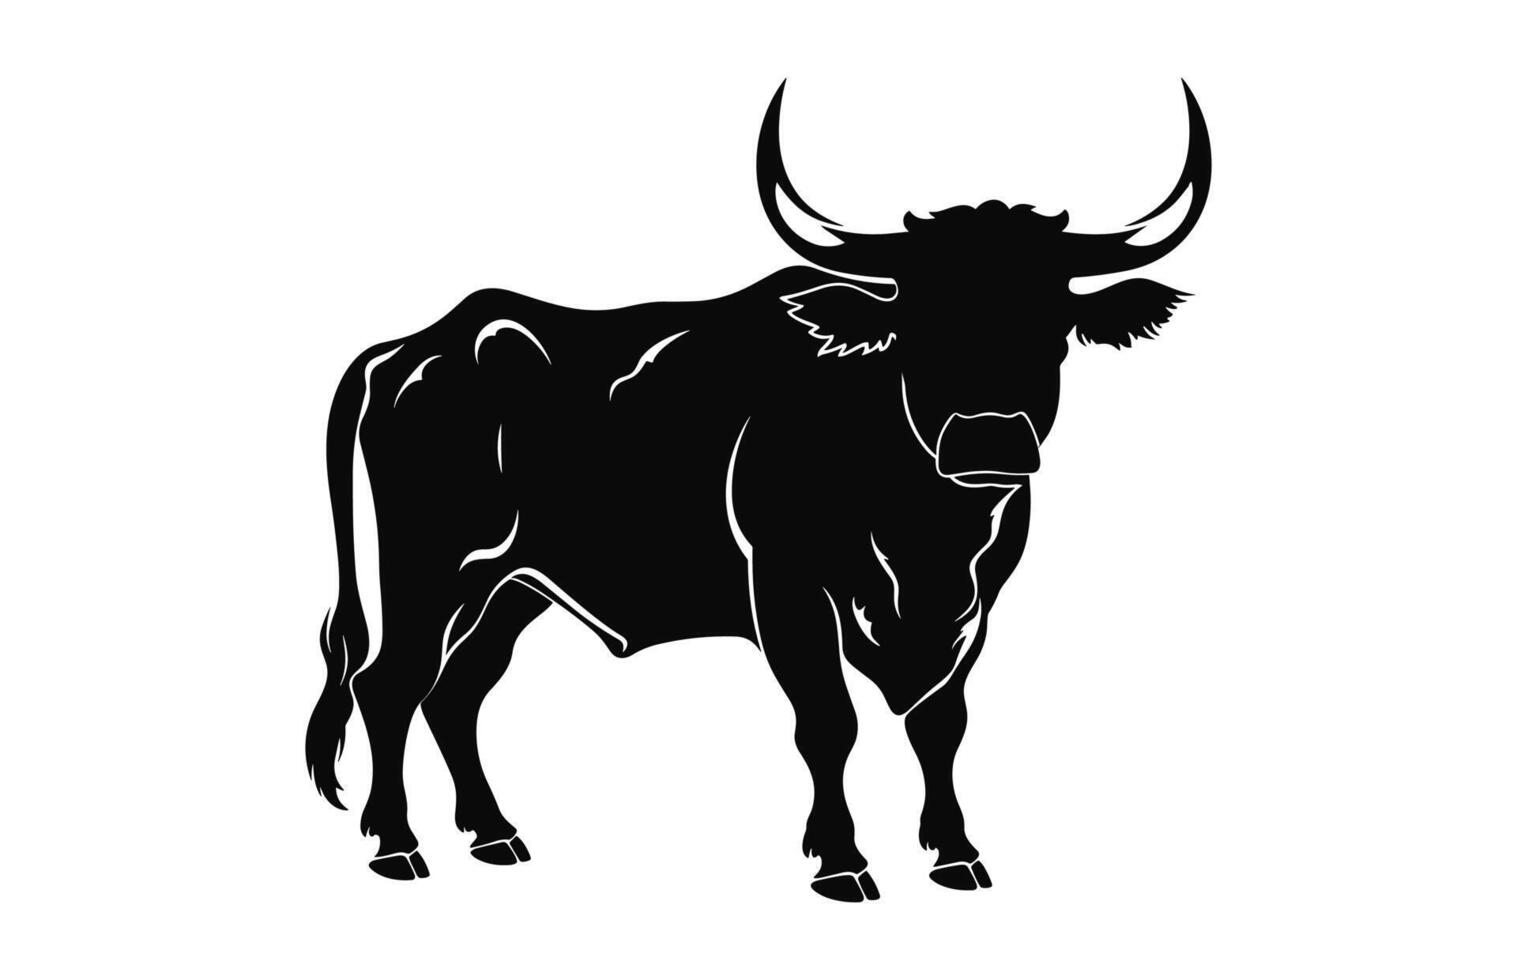 A Bull Silhouette vector isolated on a white background